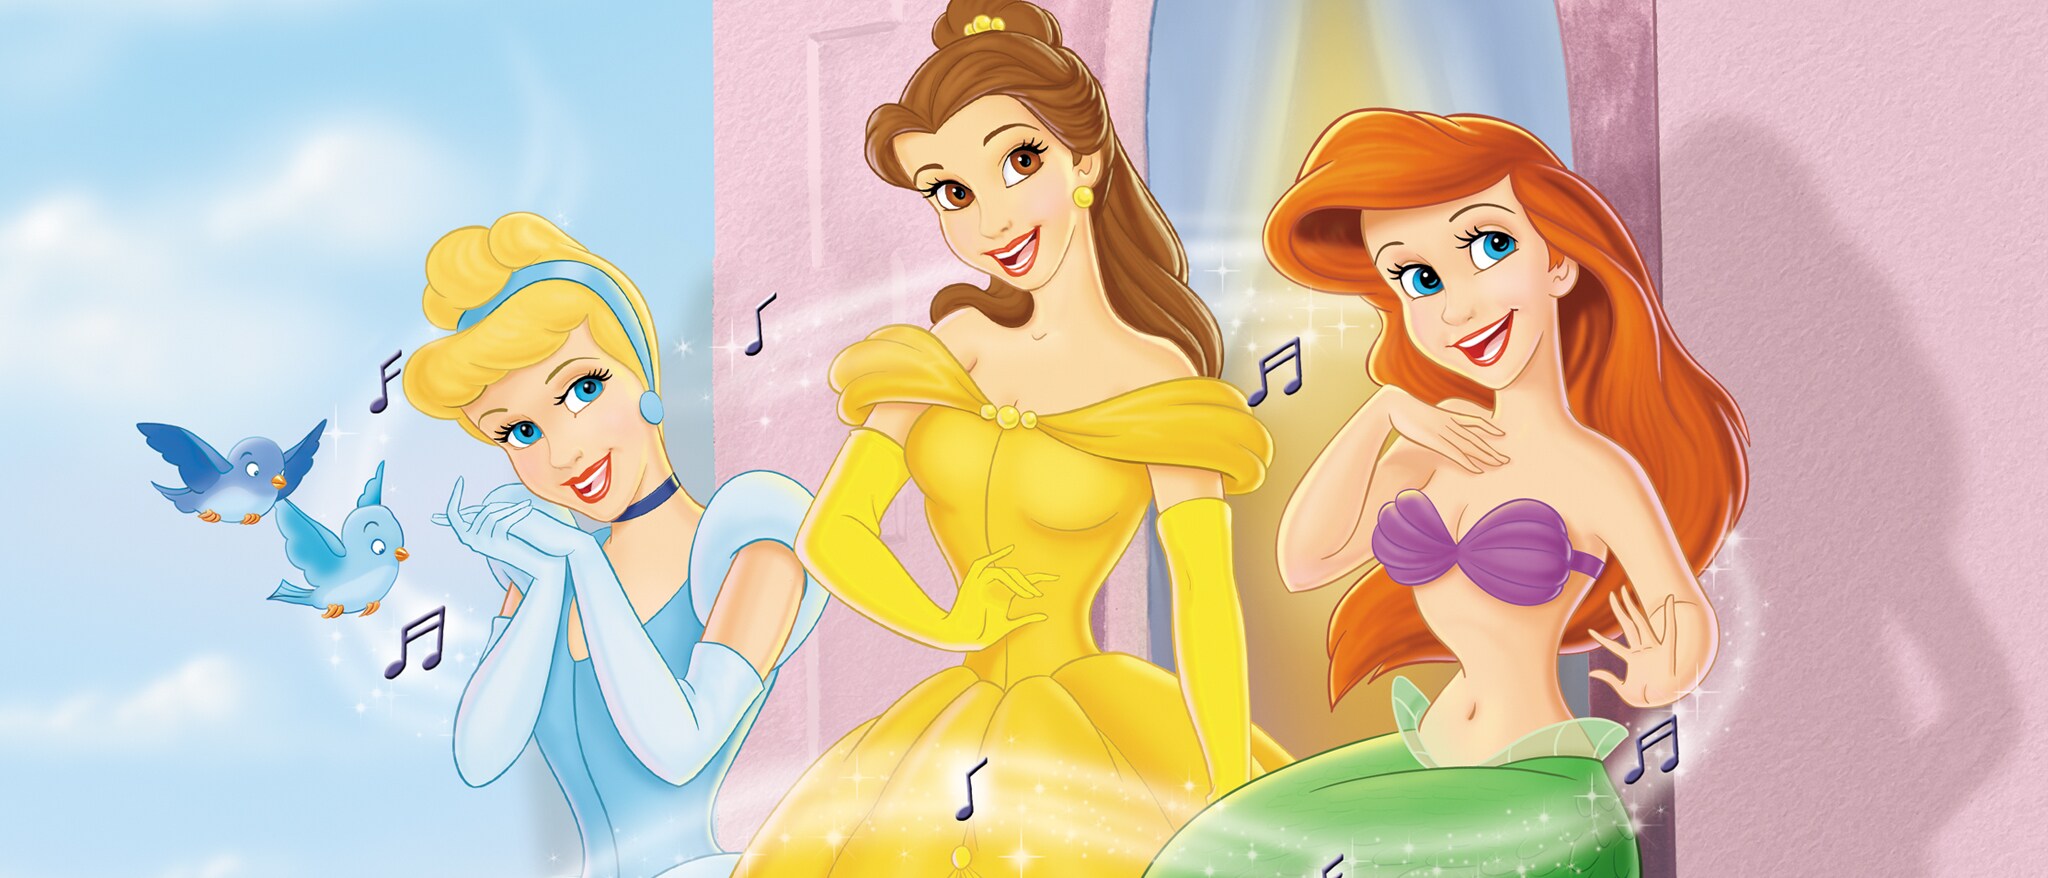 Disney Princess Sing Along Songs Volume One: Once Upon a Dream Hero